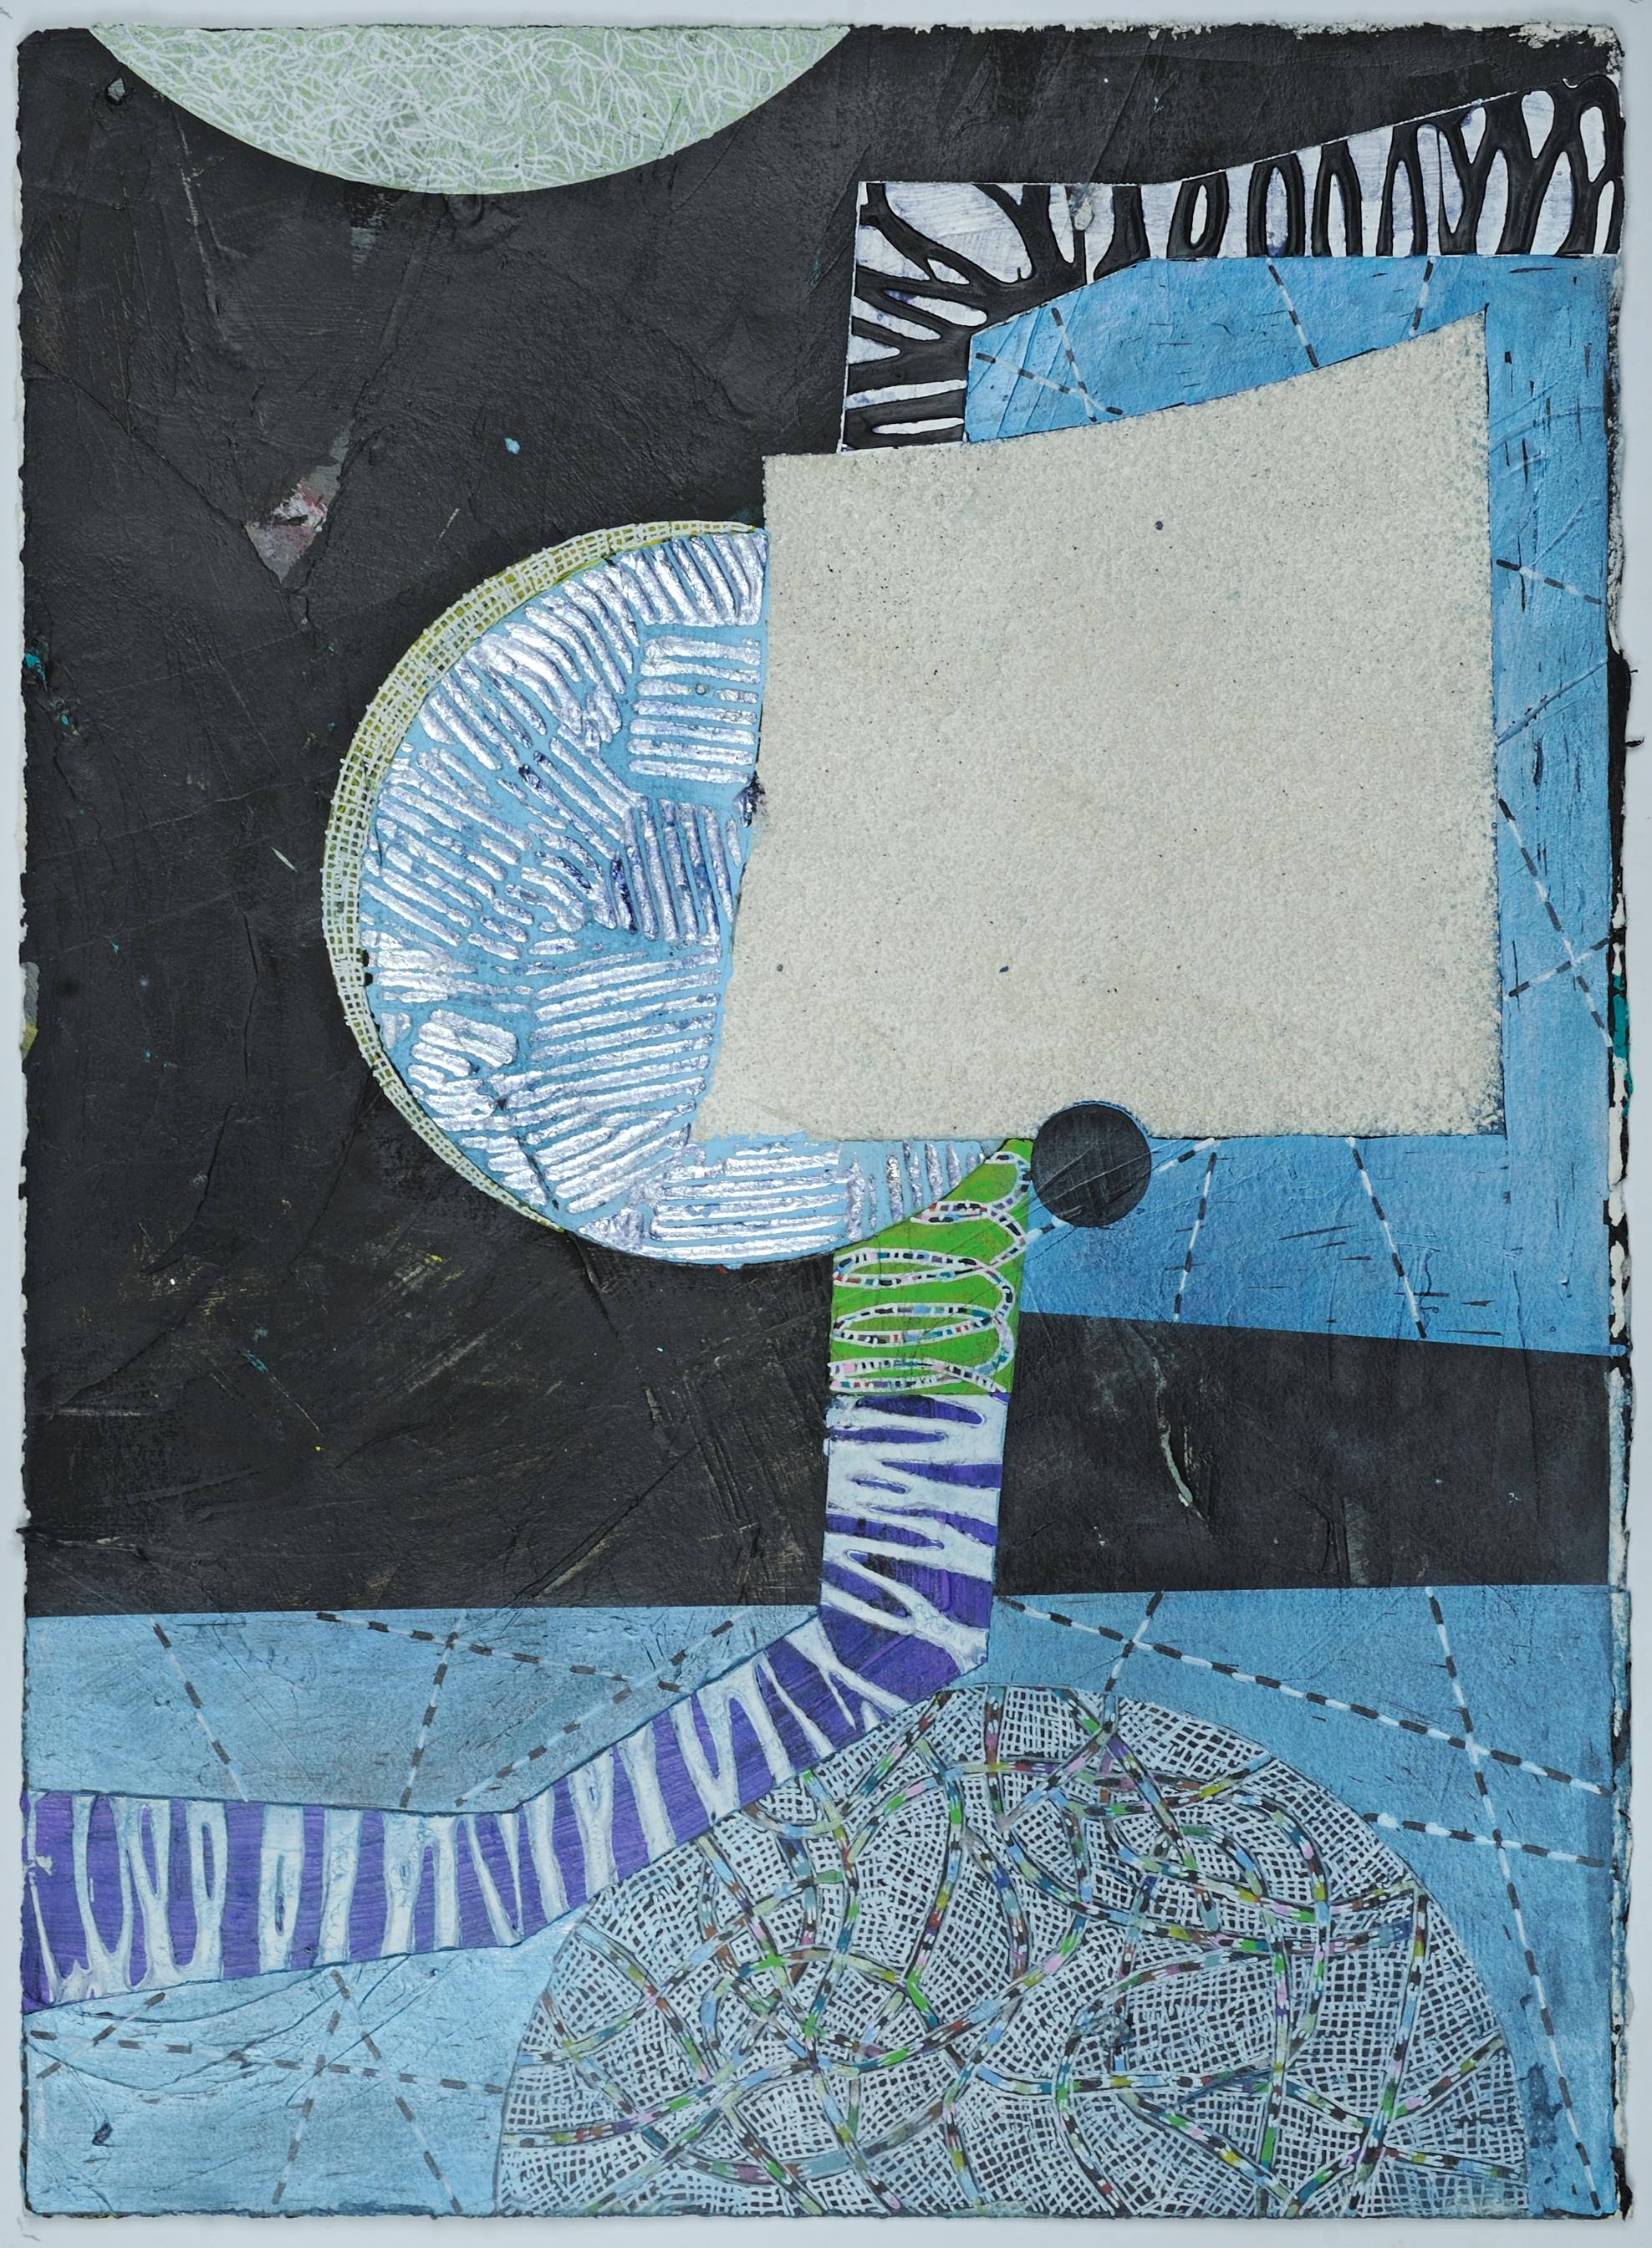 Francie Hester Abstract Drawing - Daily Drawing 2020 #21, geometric abstract work on paper, black and blue